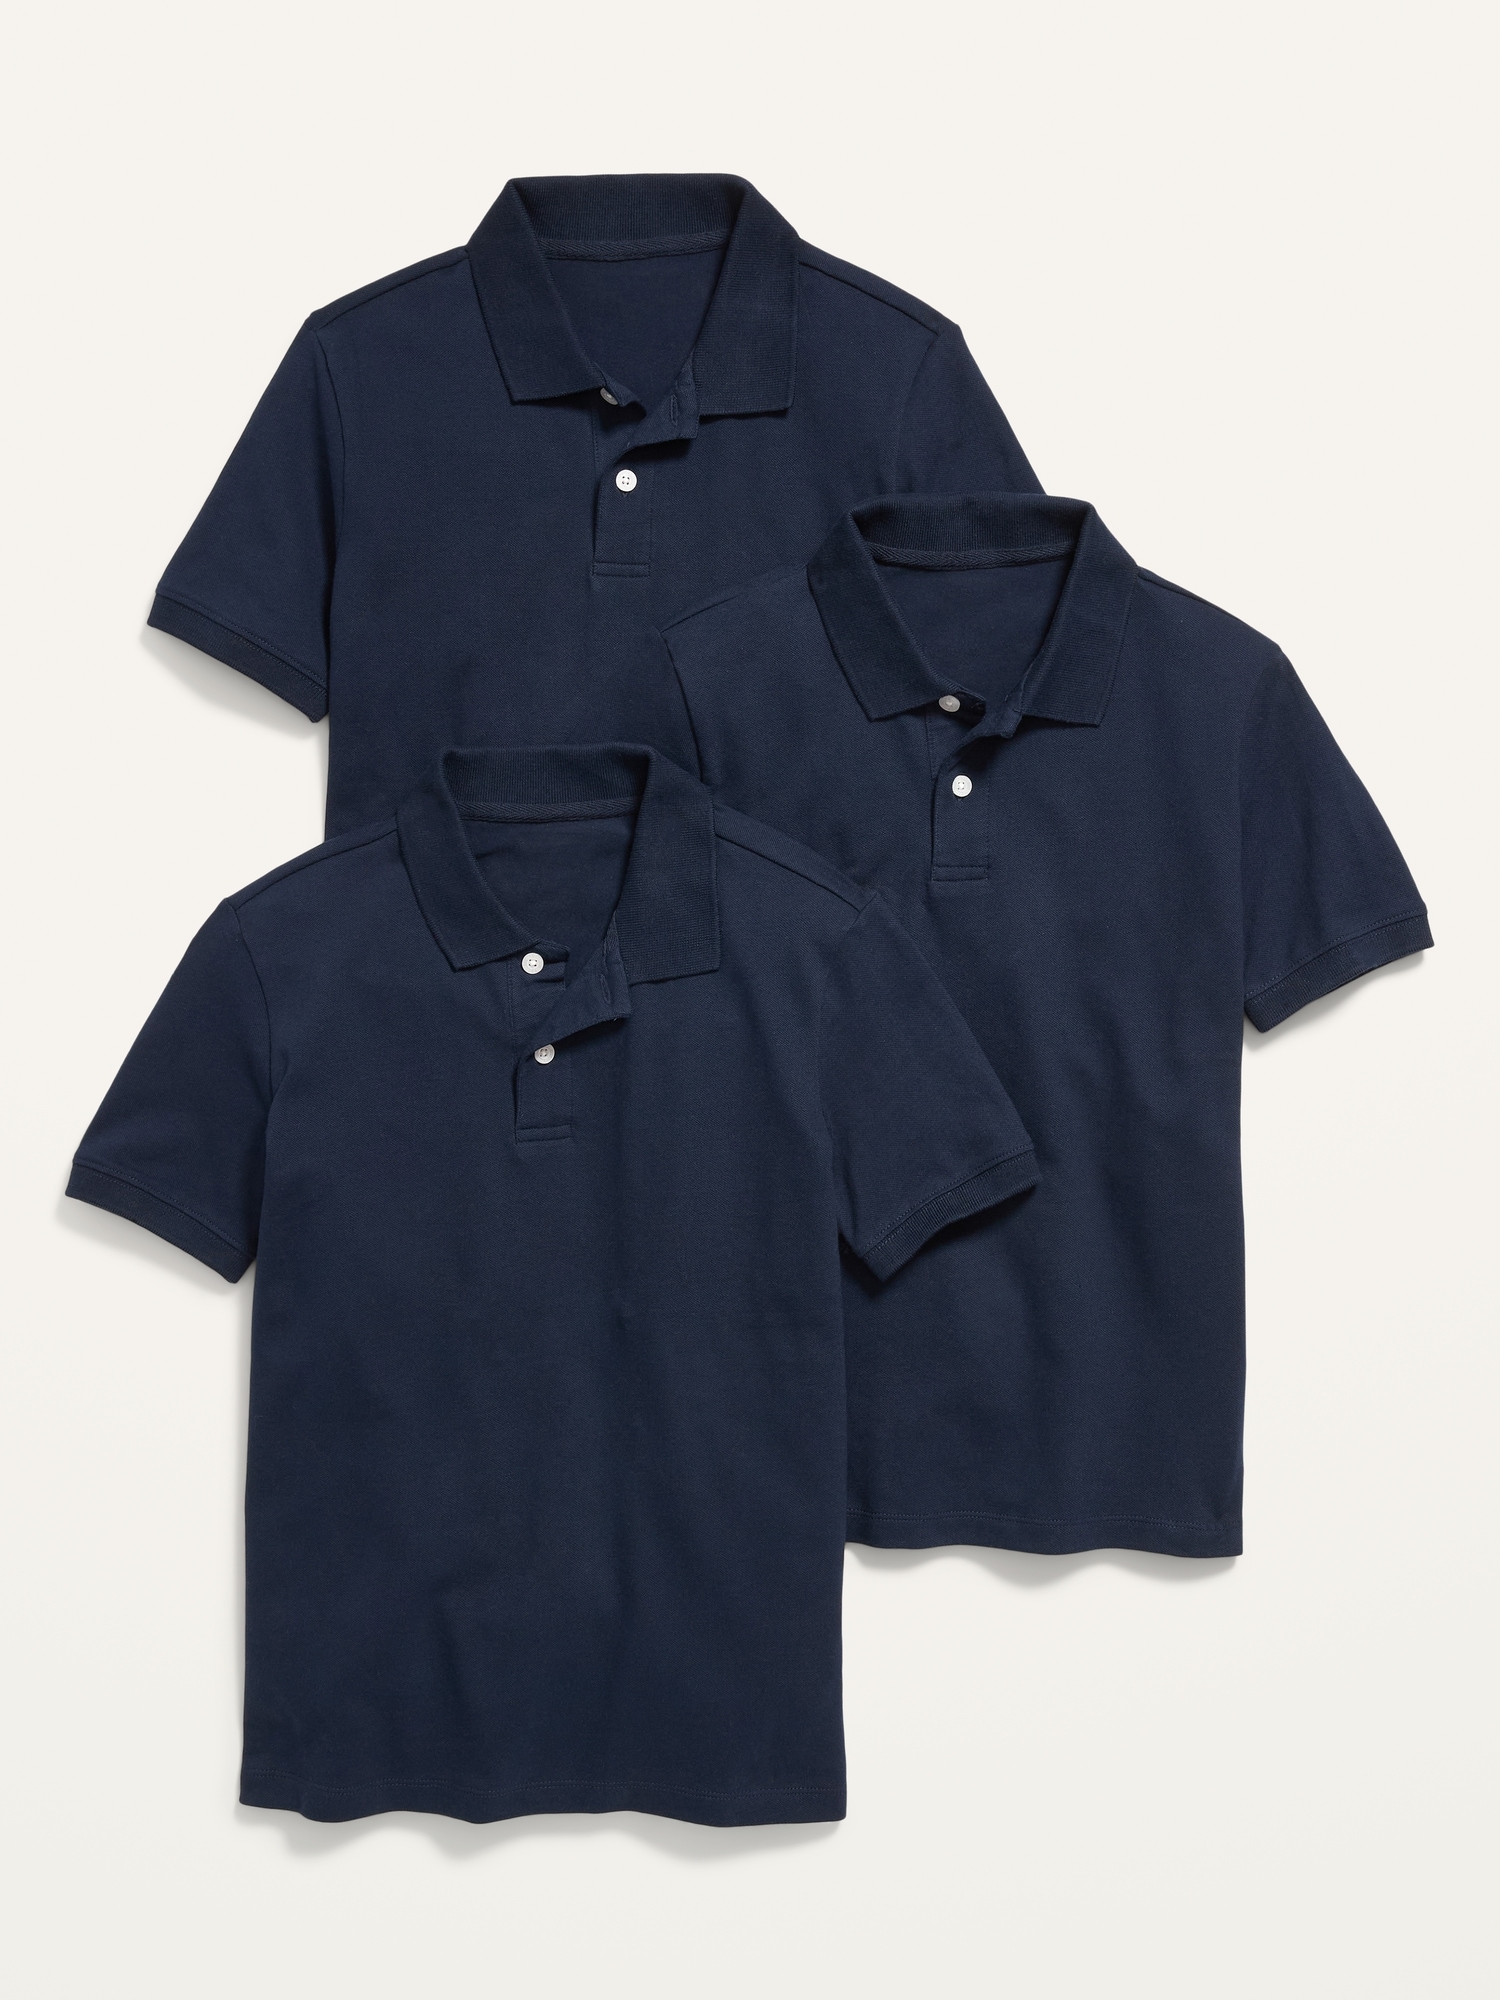 Old Navy School Uniform Polo Shirt 3-Pack for Boys blue. 1